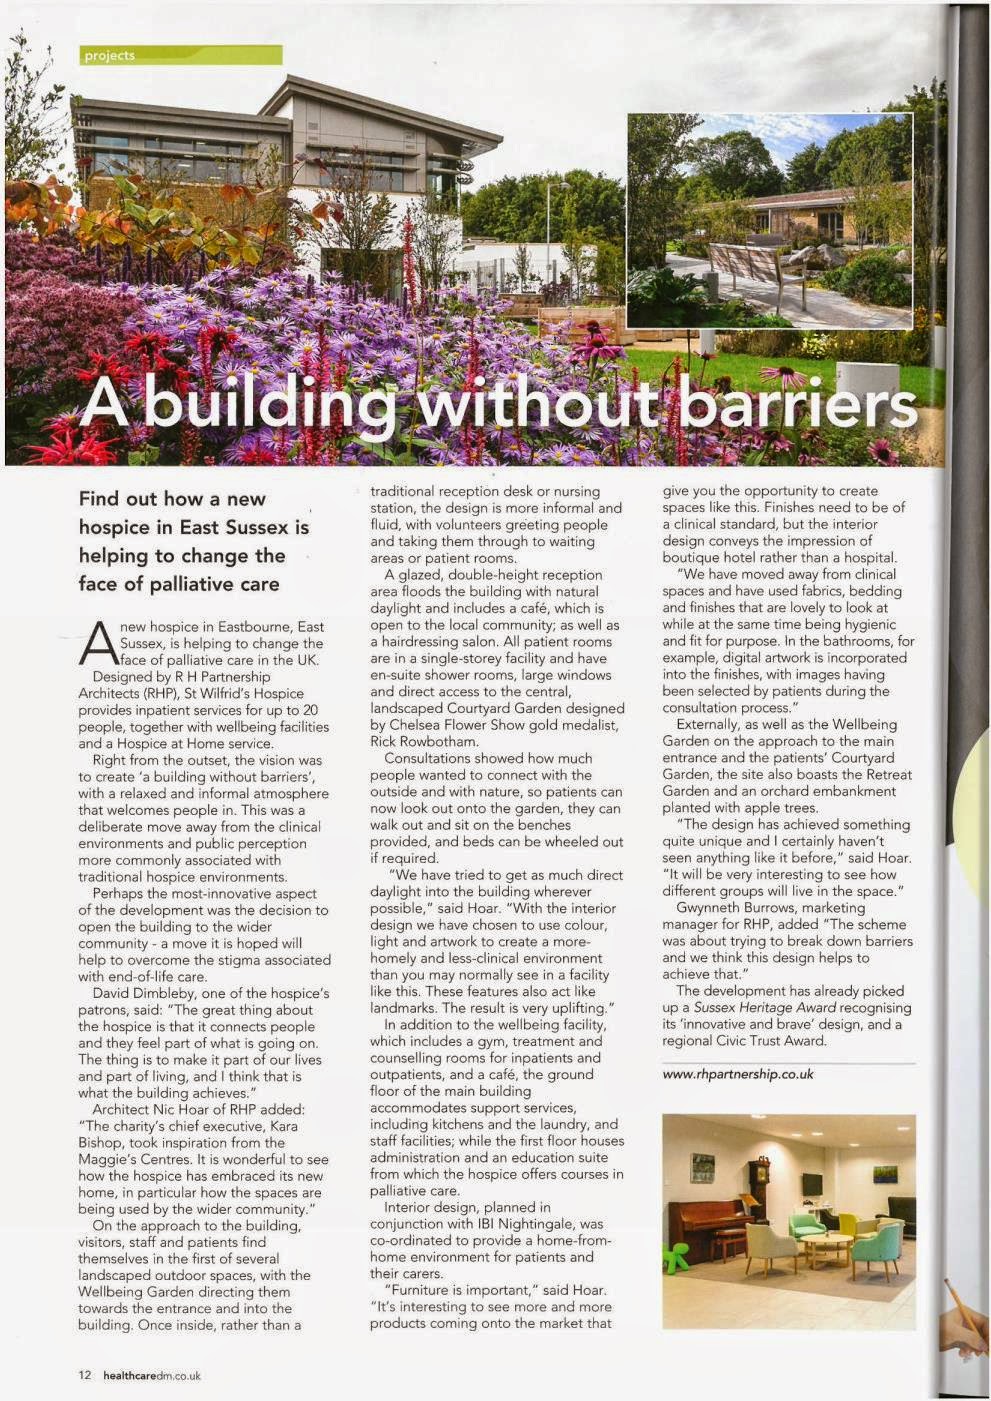 Healthcare Design & Management Features St Wilfrid’s Hospice